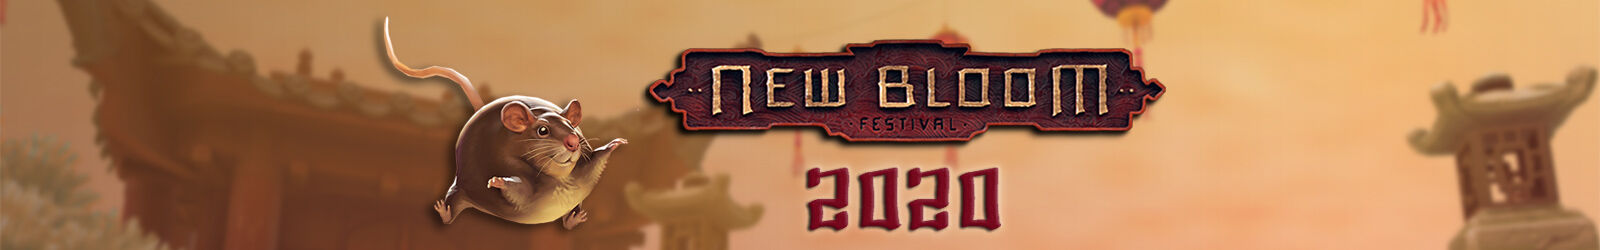 Main Page Giant Banner New Bloom 2020.jpg